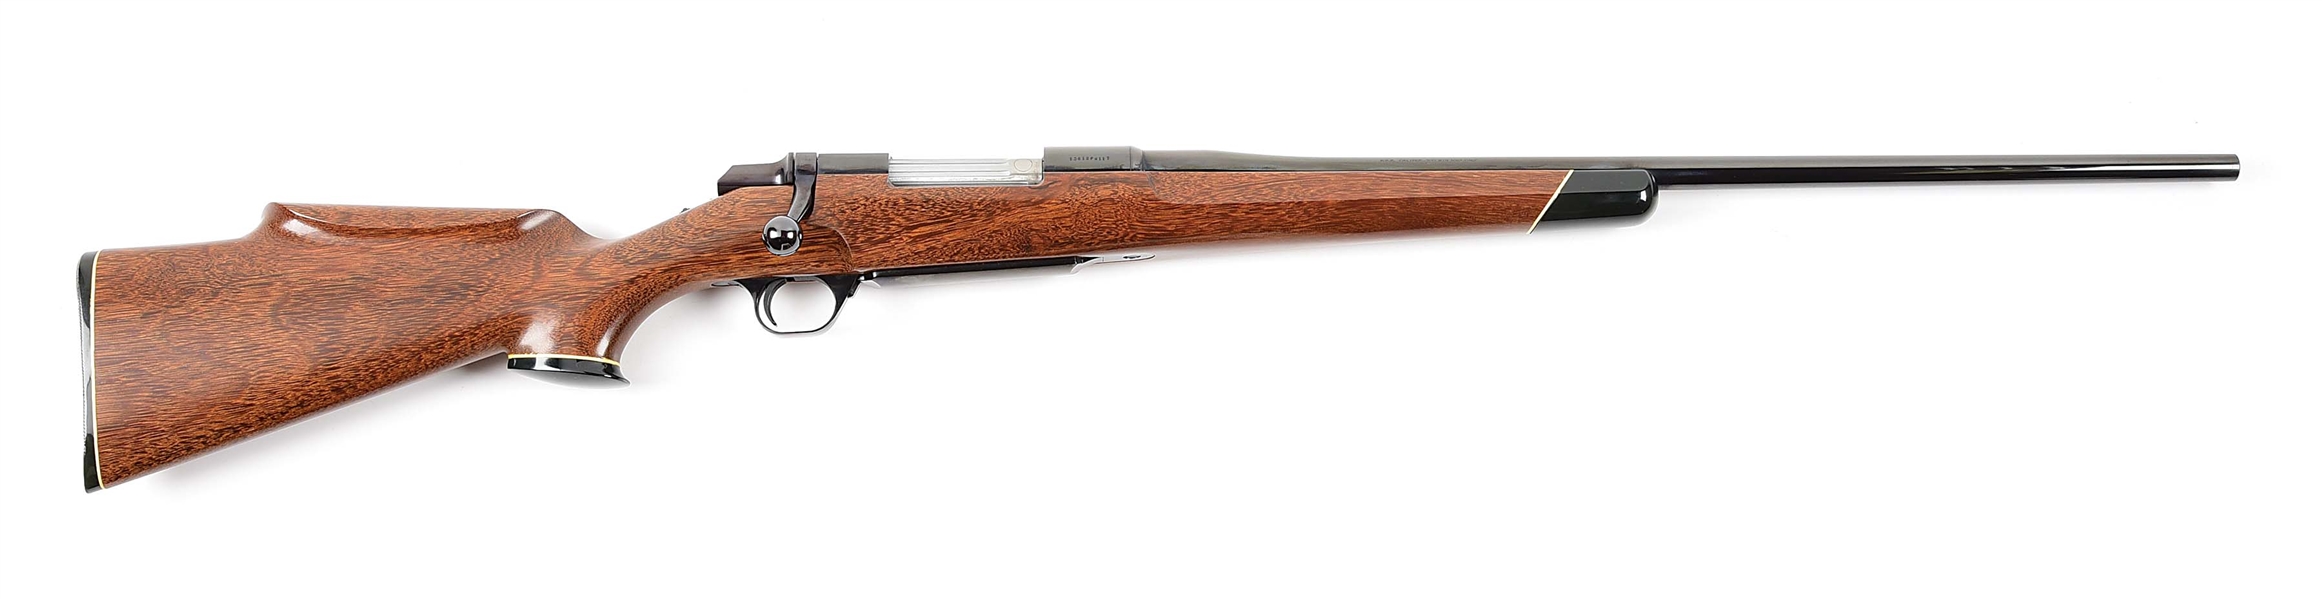 (M) BROWNING BBR BOLT ACTION RIFLE WITH SUCUPIRA STOCK.